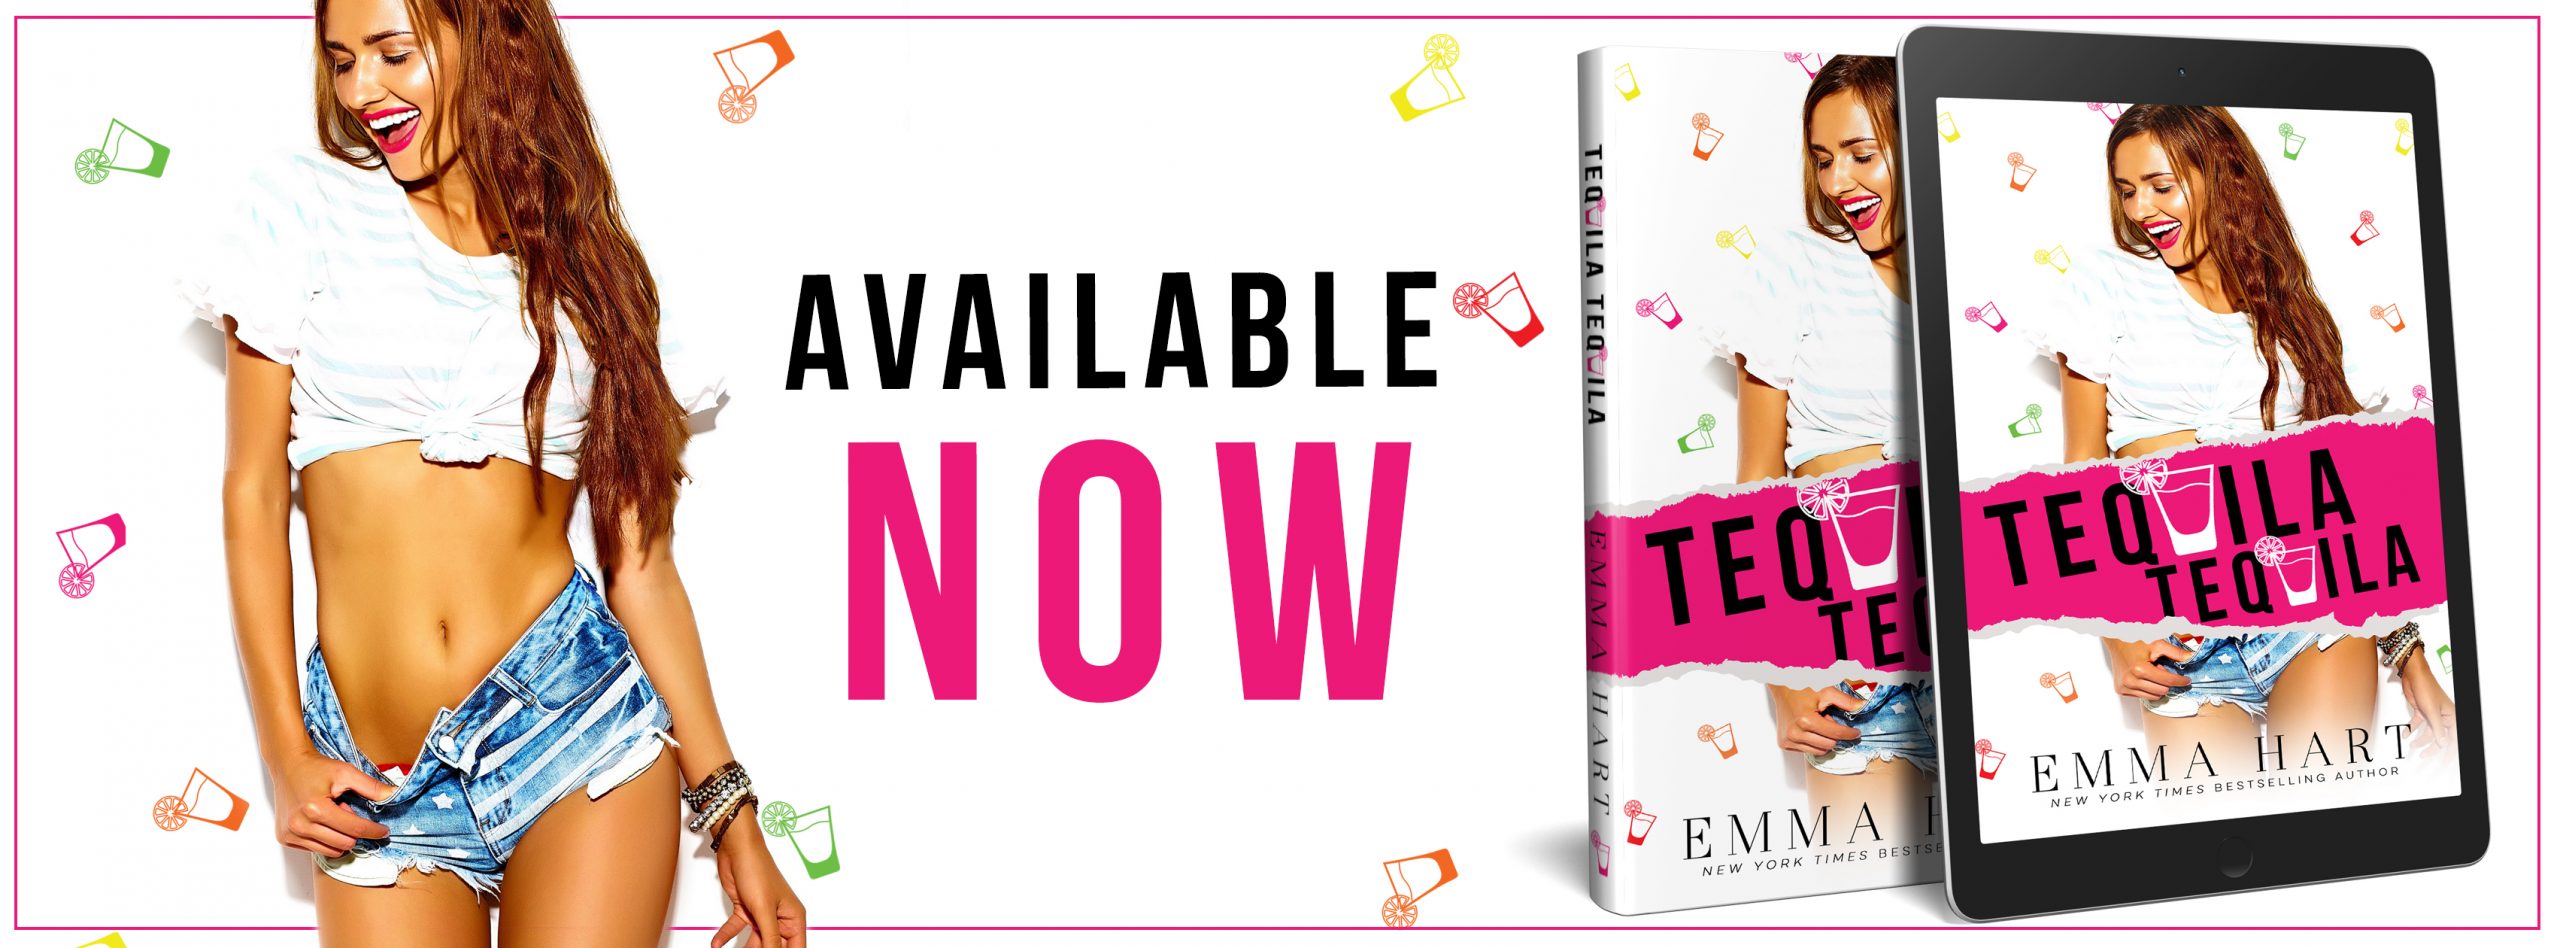 Blog Tour Review with Excerpt:  Tequila, Tequila by Emma Hart